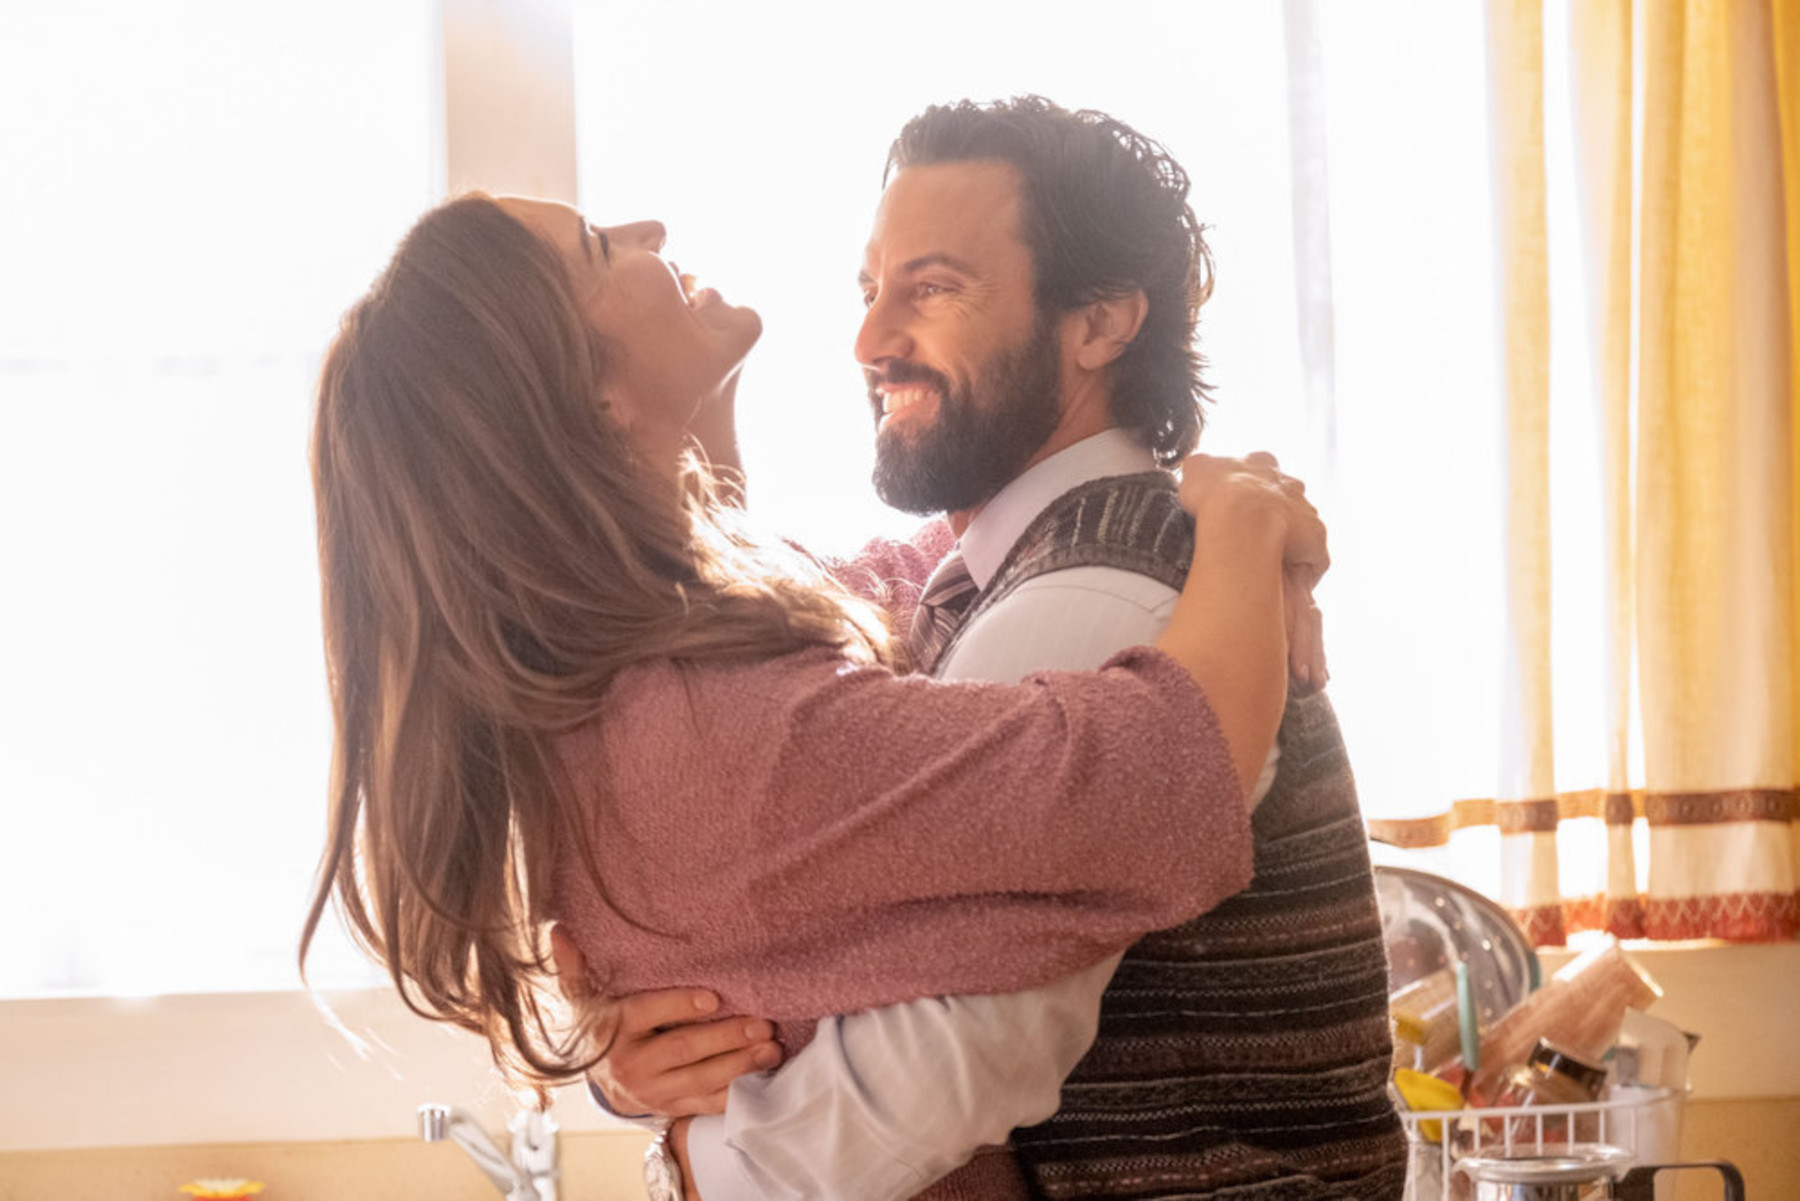 Mandy Moore and Milo Ventimiglia as Rebecca and Jack Pearson in 'This Is Us,' which was originally almost 4 seasons. Jack is holding Rebecca, and she's laughing. They're in front of a window, and sunlight is pouring in.